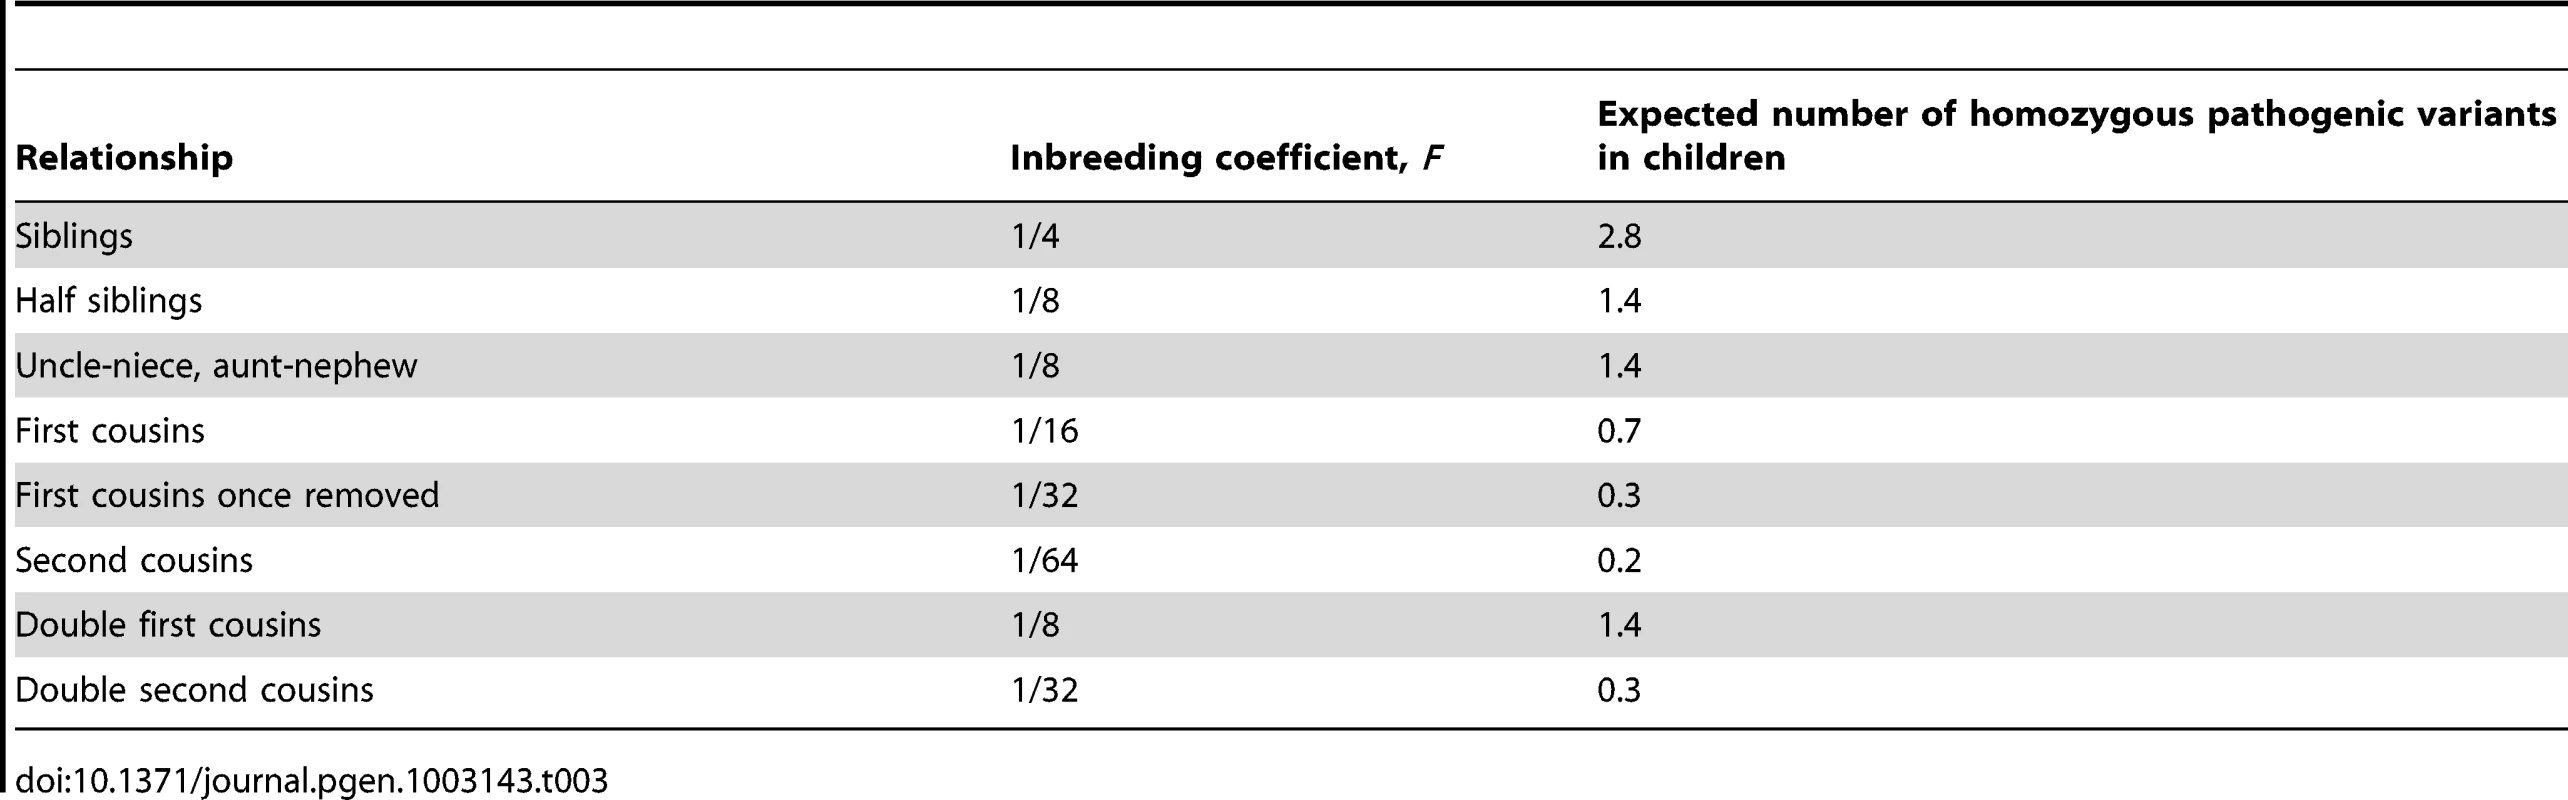 Theoretical inbreeding coefficient (&lt;i&gt;F&lt;/i&gt;) and corresponding number of homozygous pathogenic variants in the children of various relationships, given that on average each individual carries 22 pathogenic derived alleles.